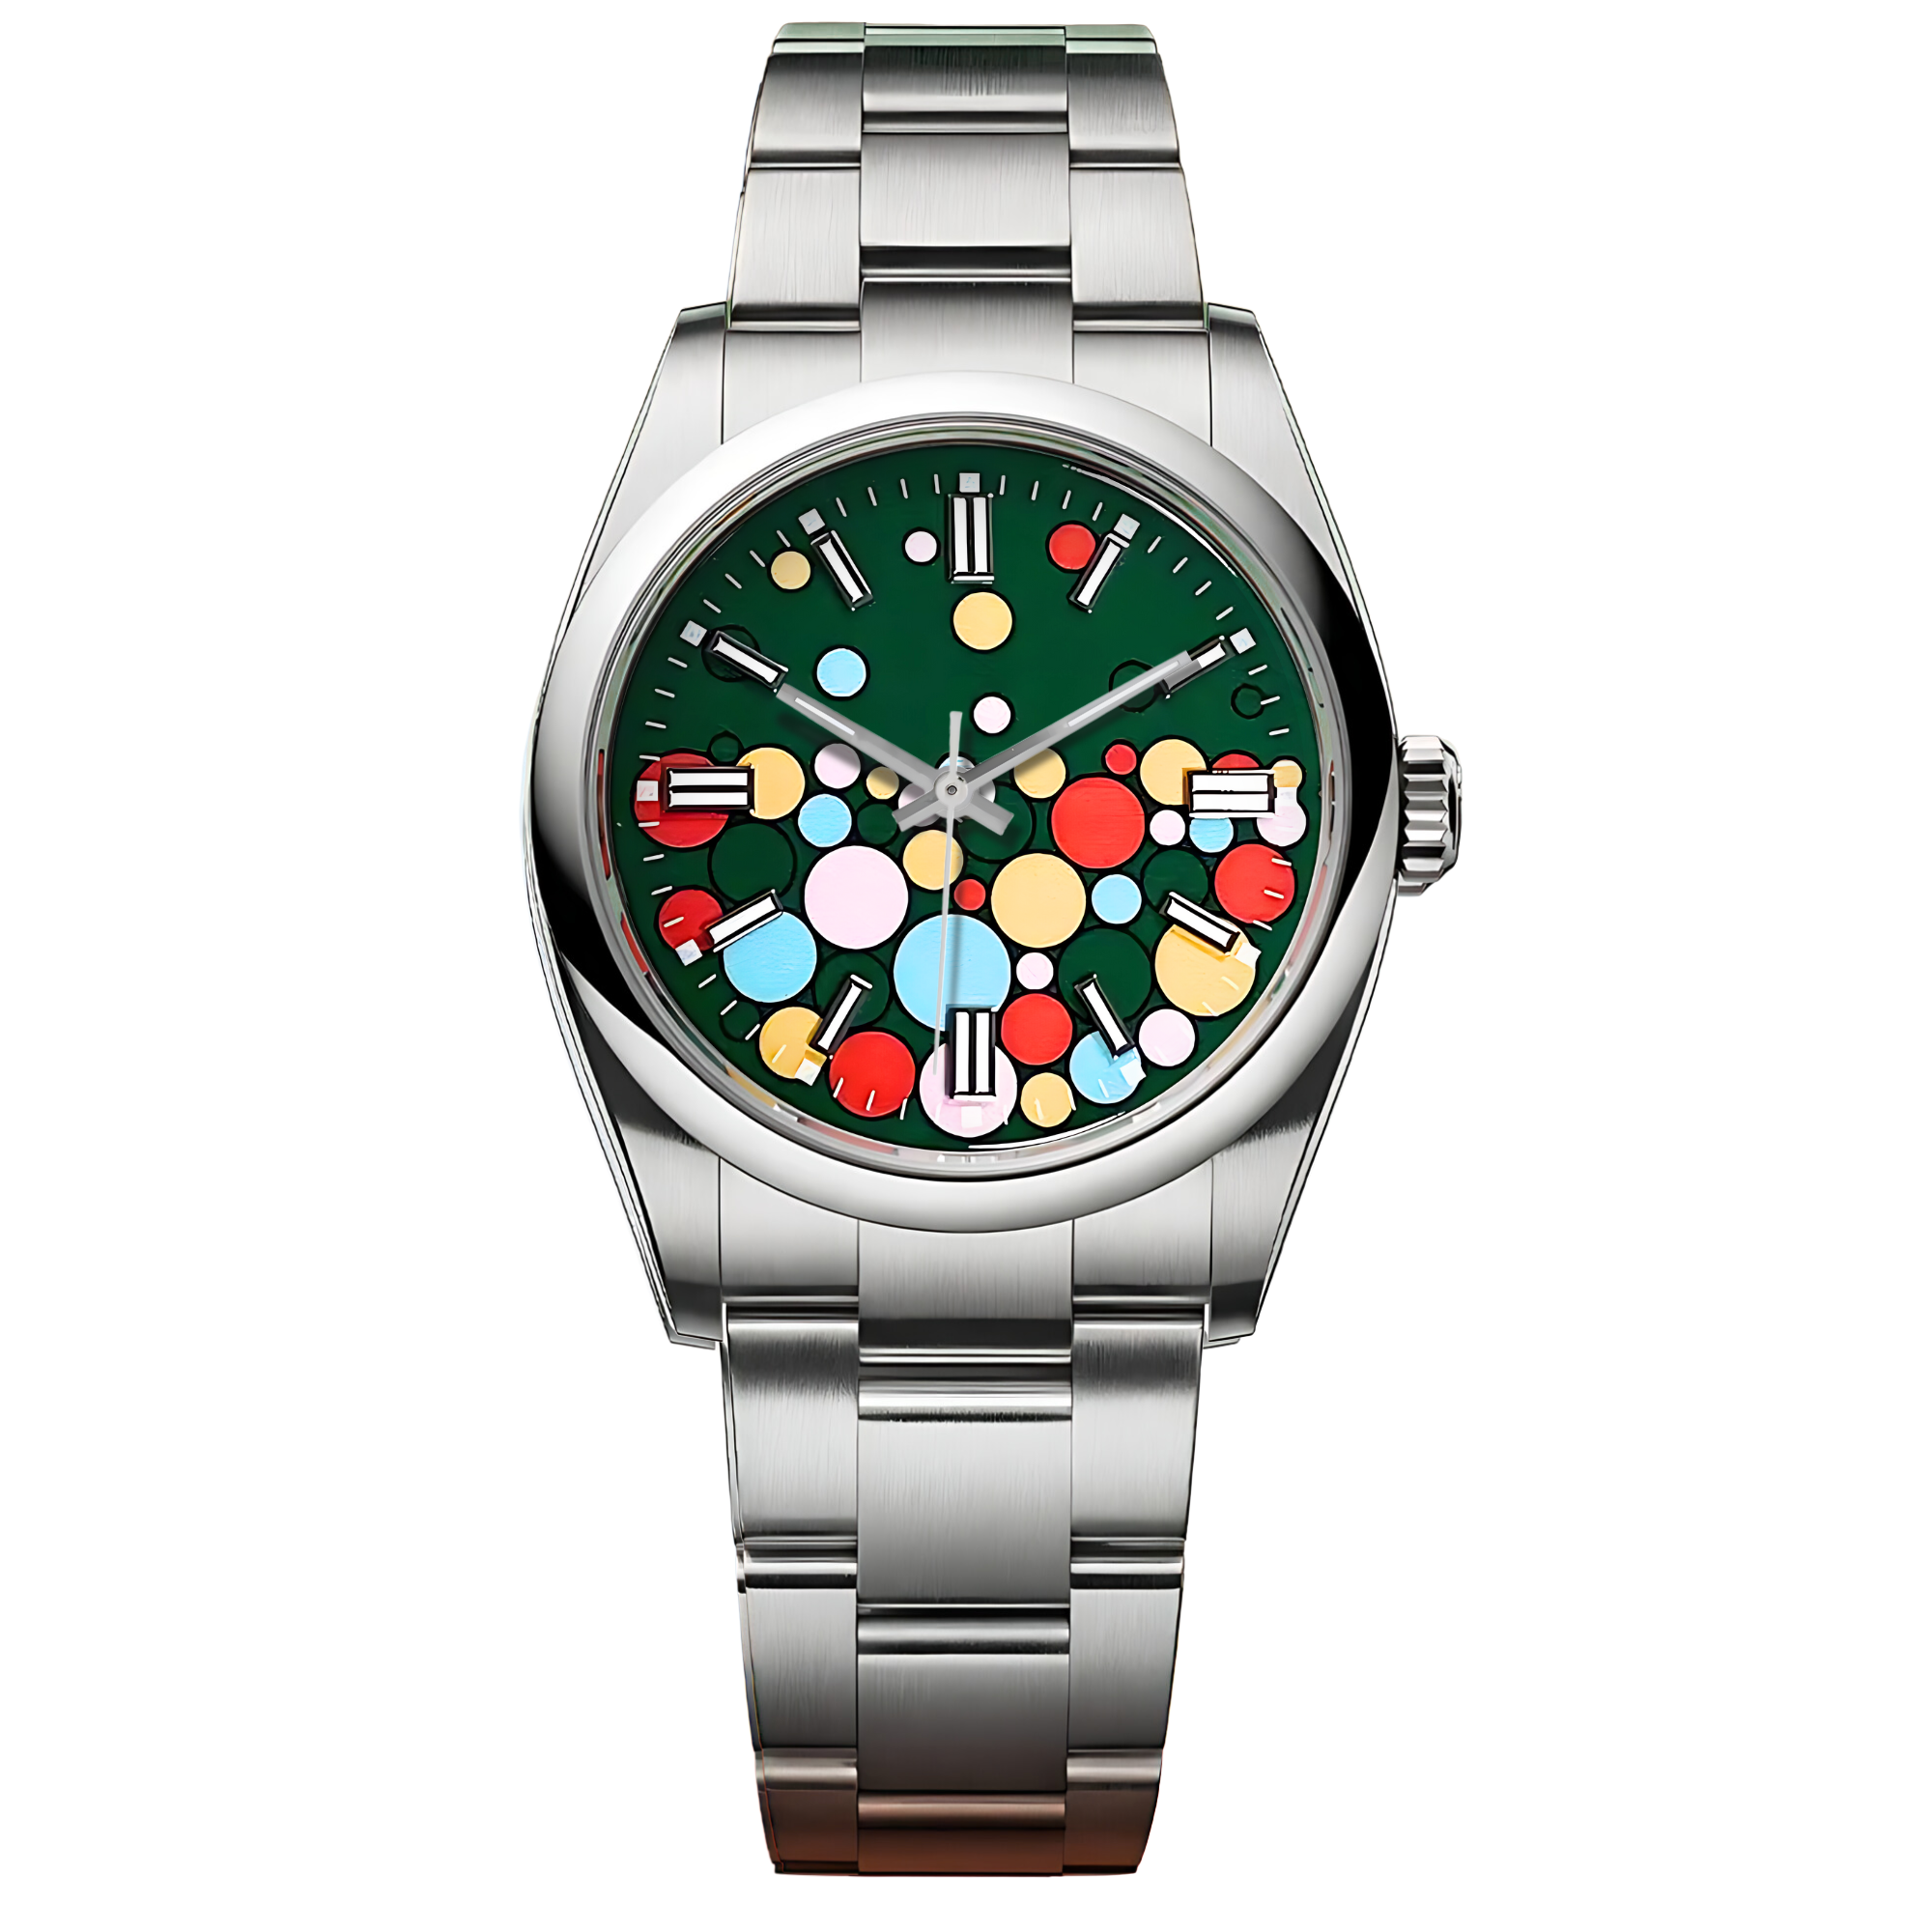 Dream Watches Special Edition 39 mm 'Celebration Dial' with Seiko NH35 Automatic Movement Sapphire Crystal Dress Watch - Emerald Celebration Green